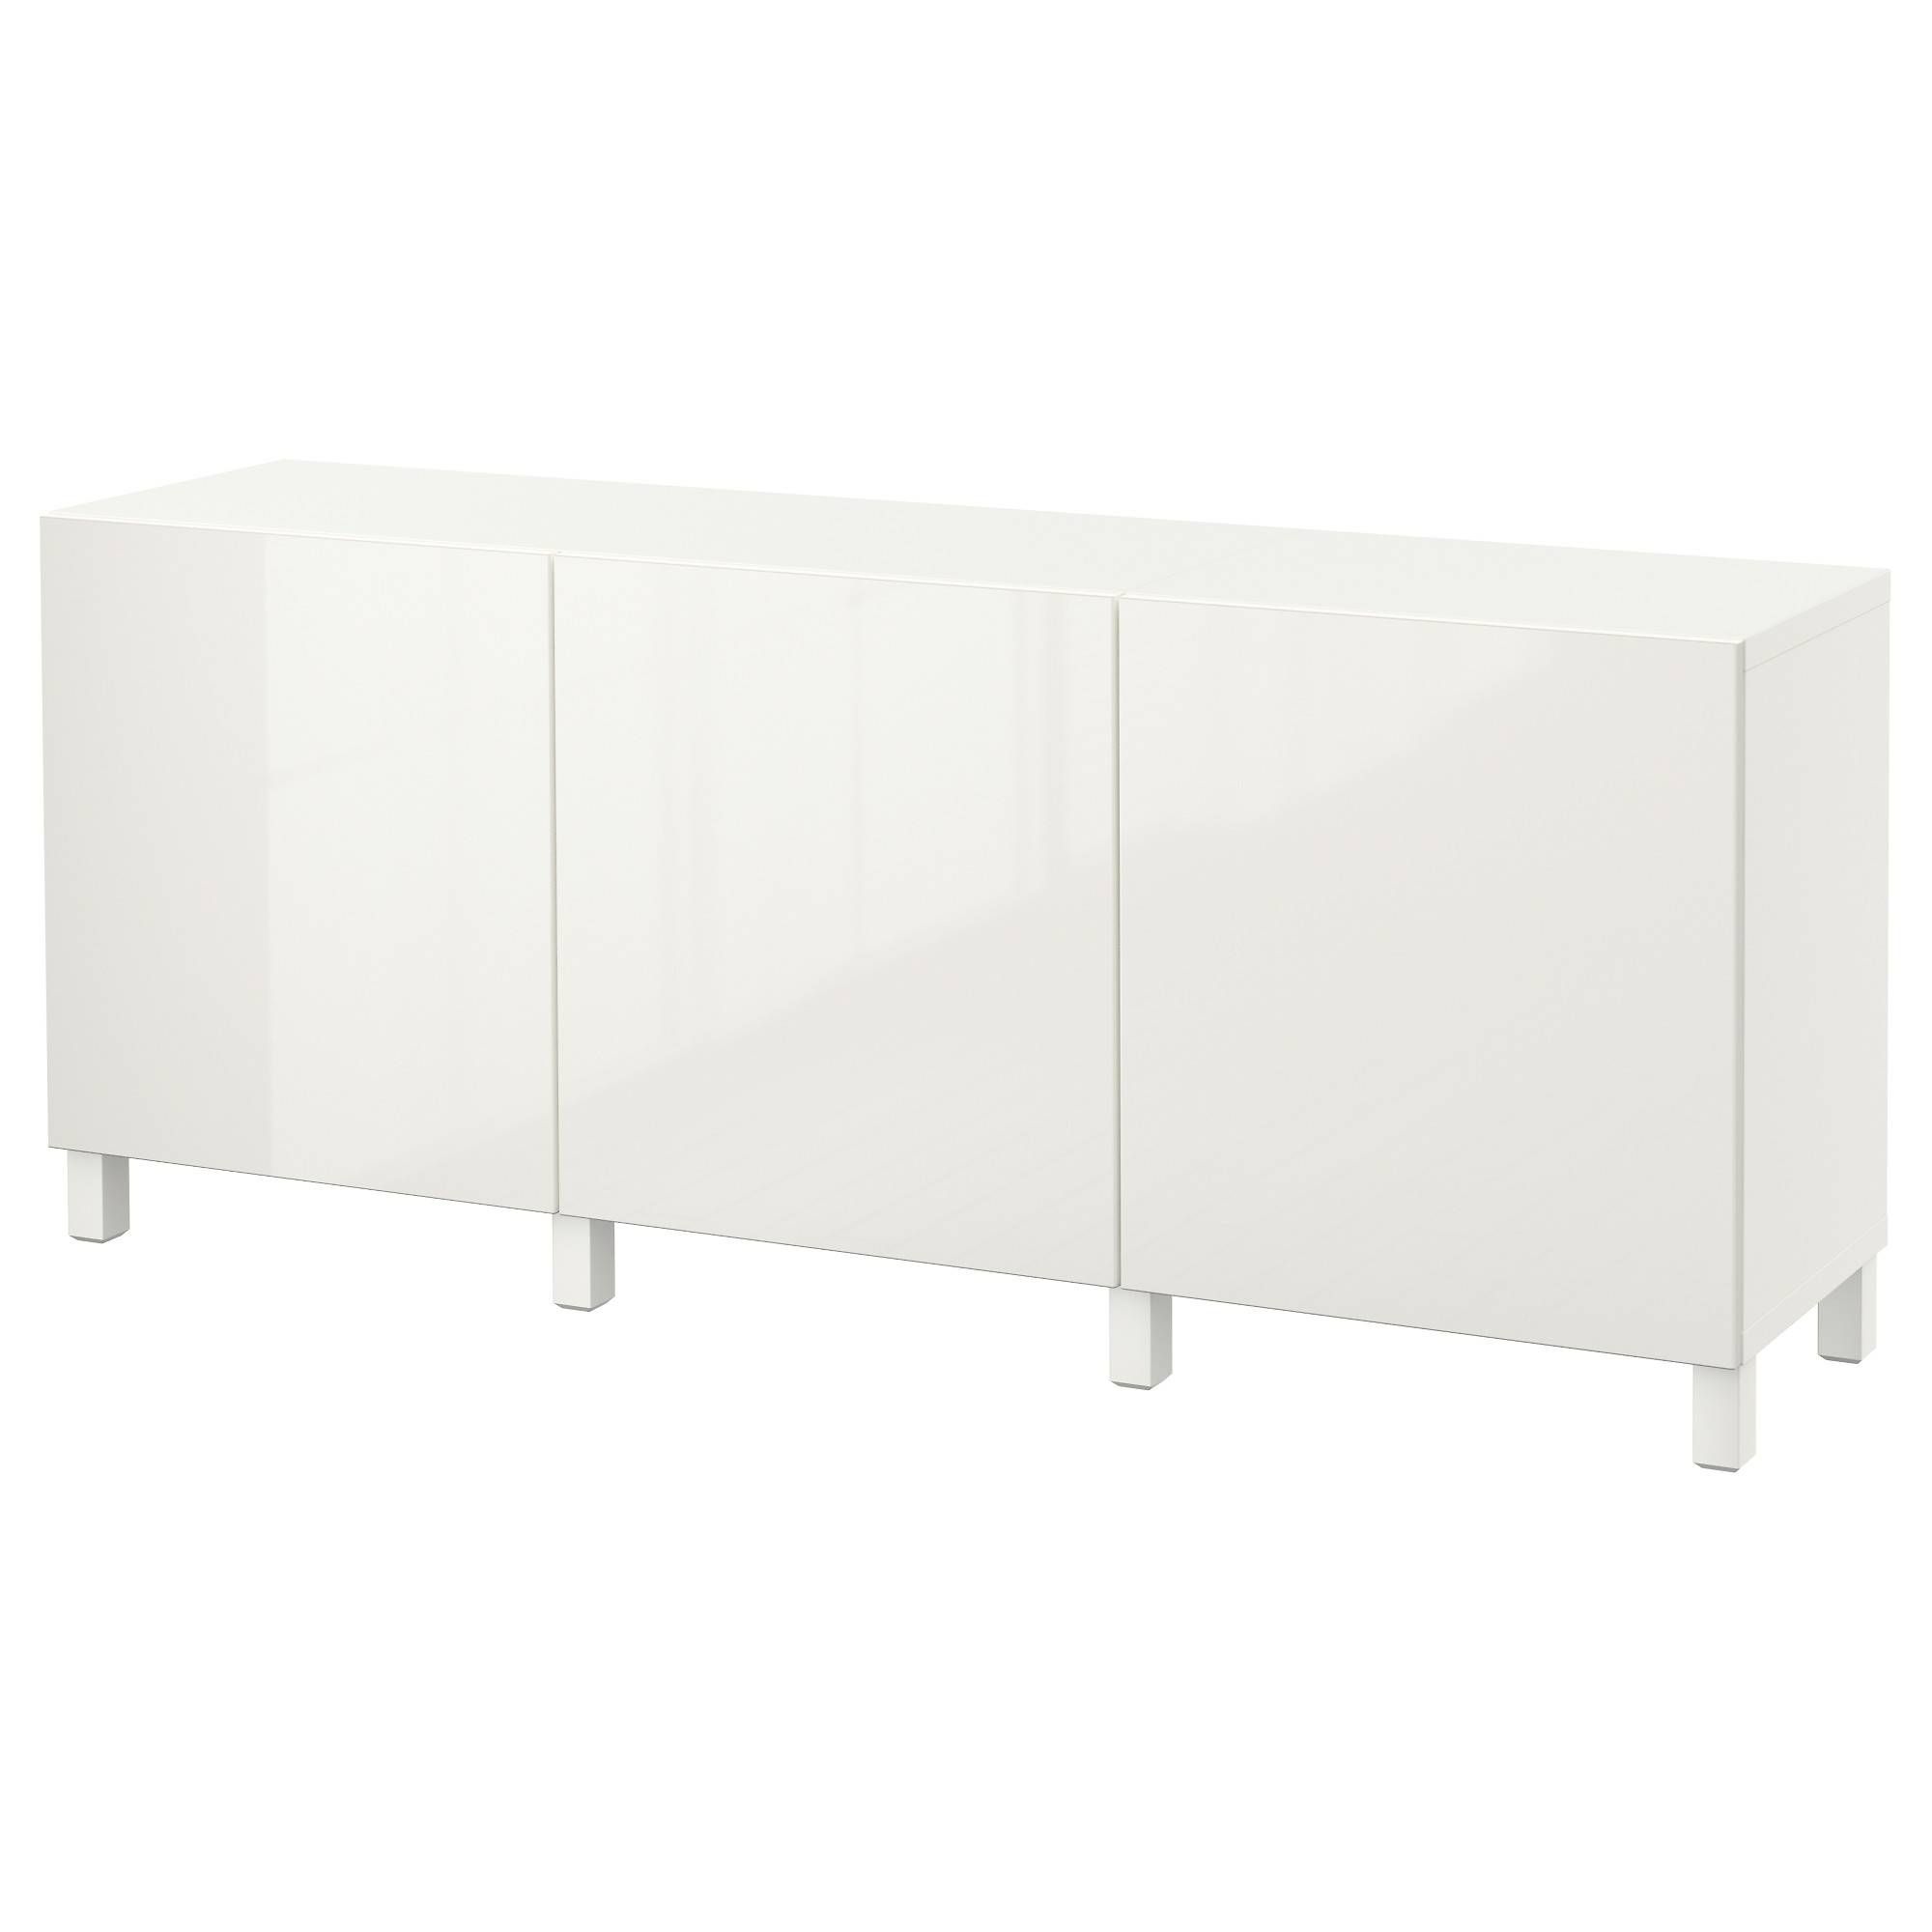 Bestå Storage Combination With Doors – White/selsviken High Gloss In Most Current Storage Sideboards (View 12 of 15)